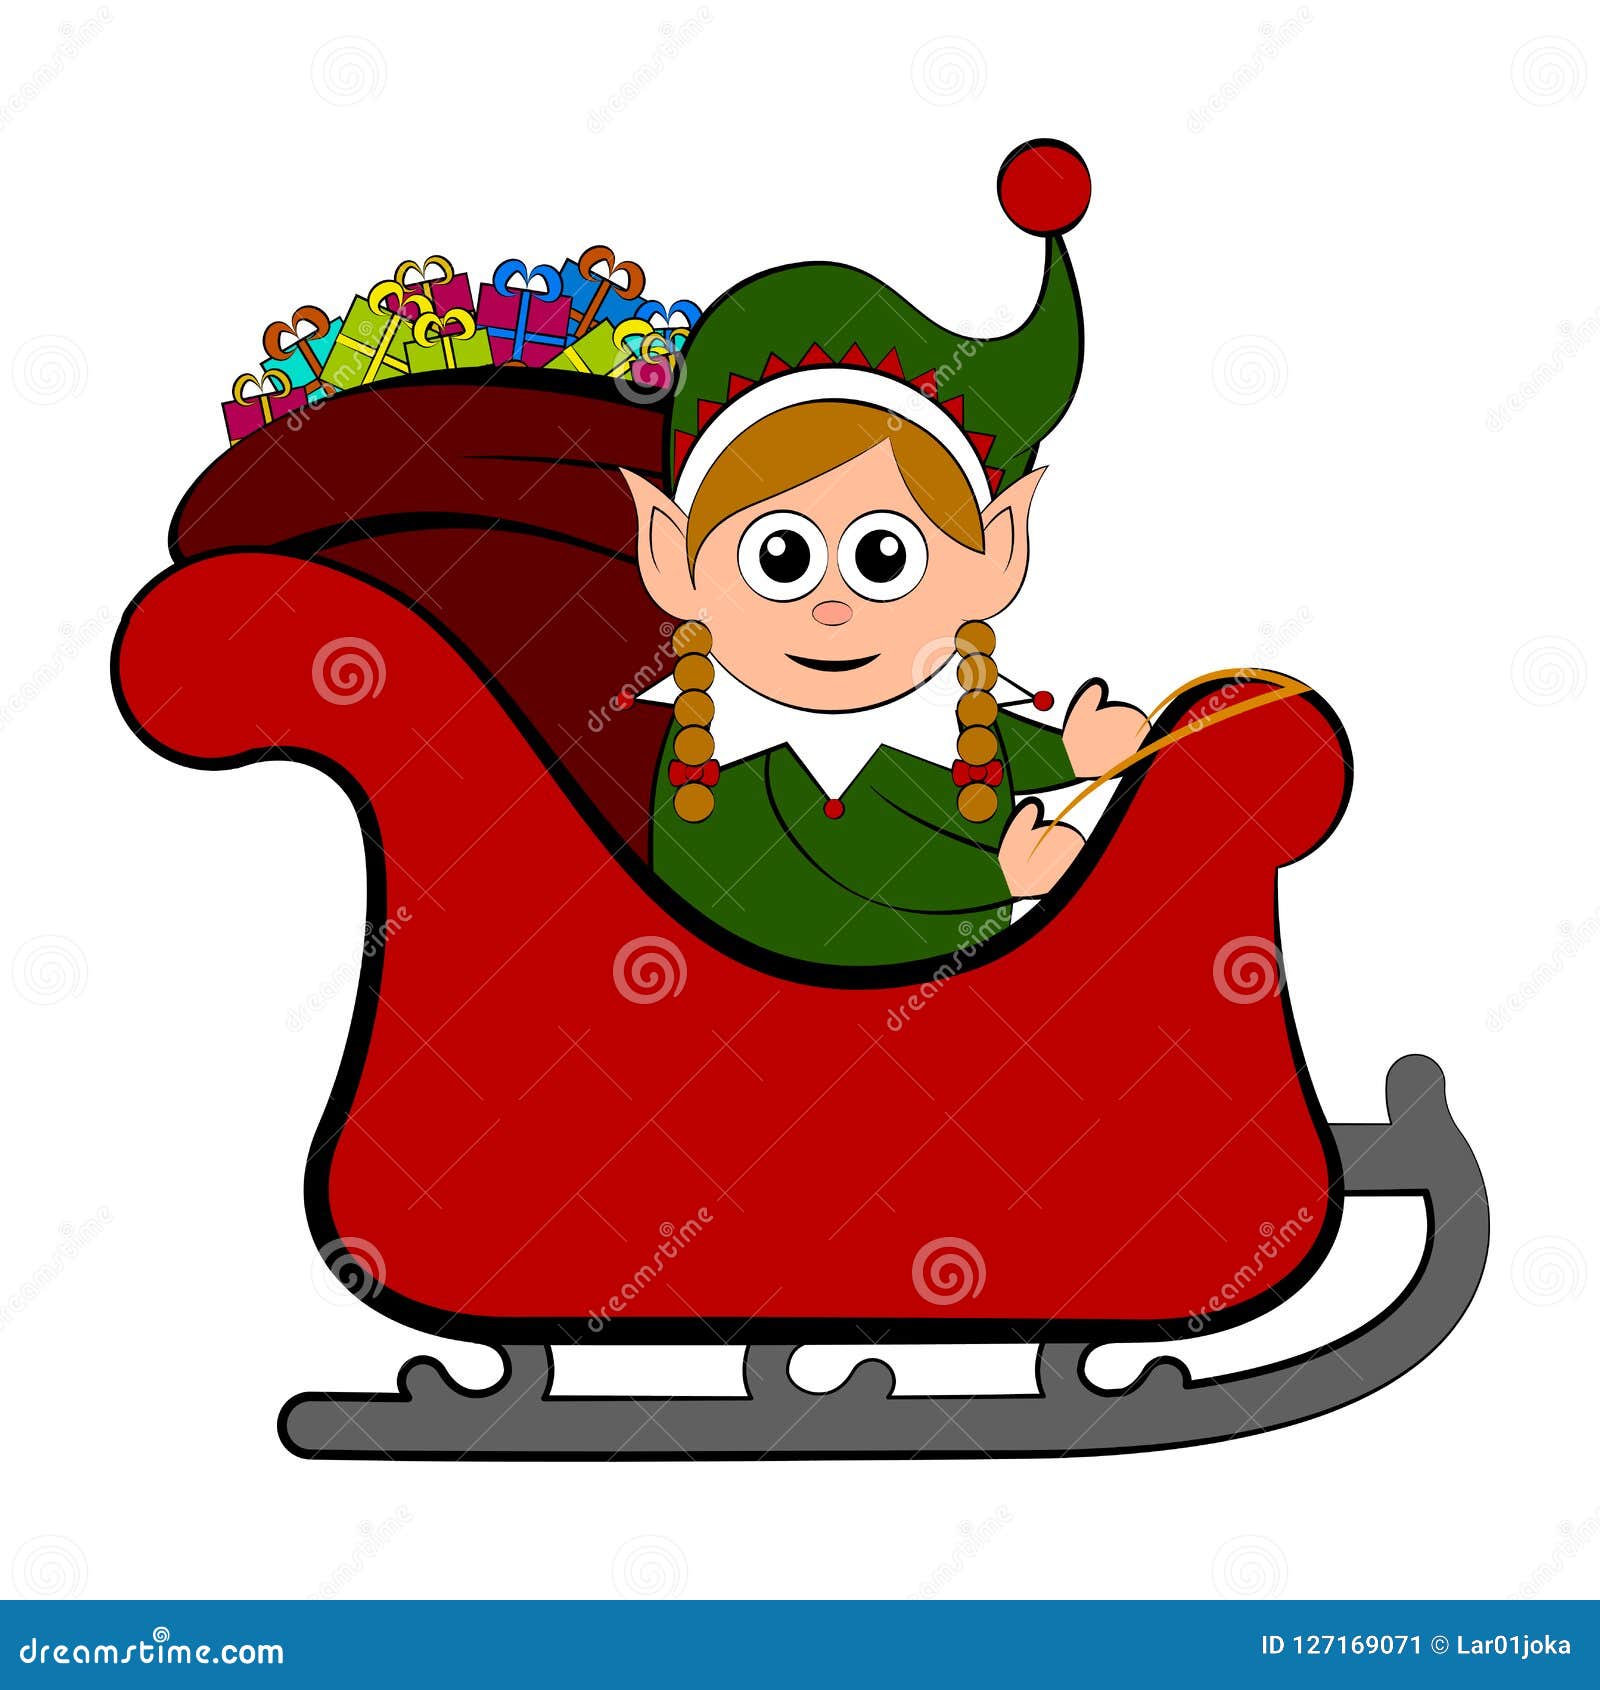 Cute Elf on a Christmas Sledge Stock Vector - Illustration of character ...